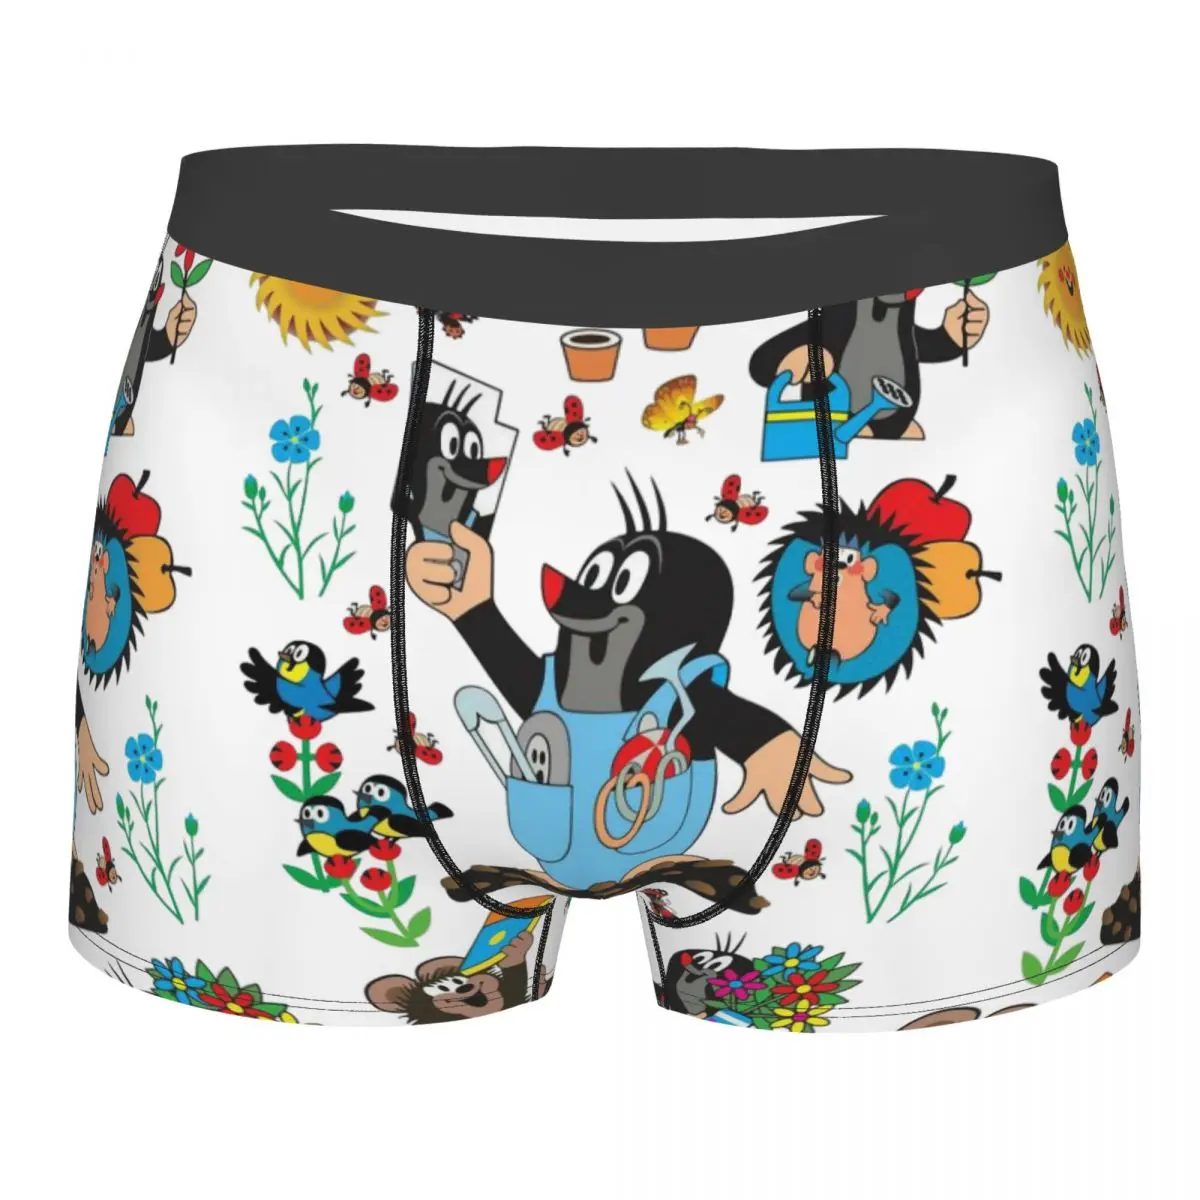 Krtek Little Maulwurf Mencosy Boxer Briefs,3D printing Underpants, Highly Breathable Top Quality Birthday Gifts [fila]archive textile printing men suitcase boxer briefs pick 1